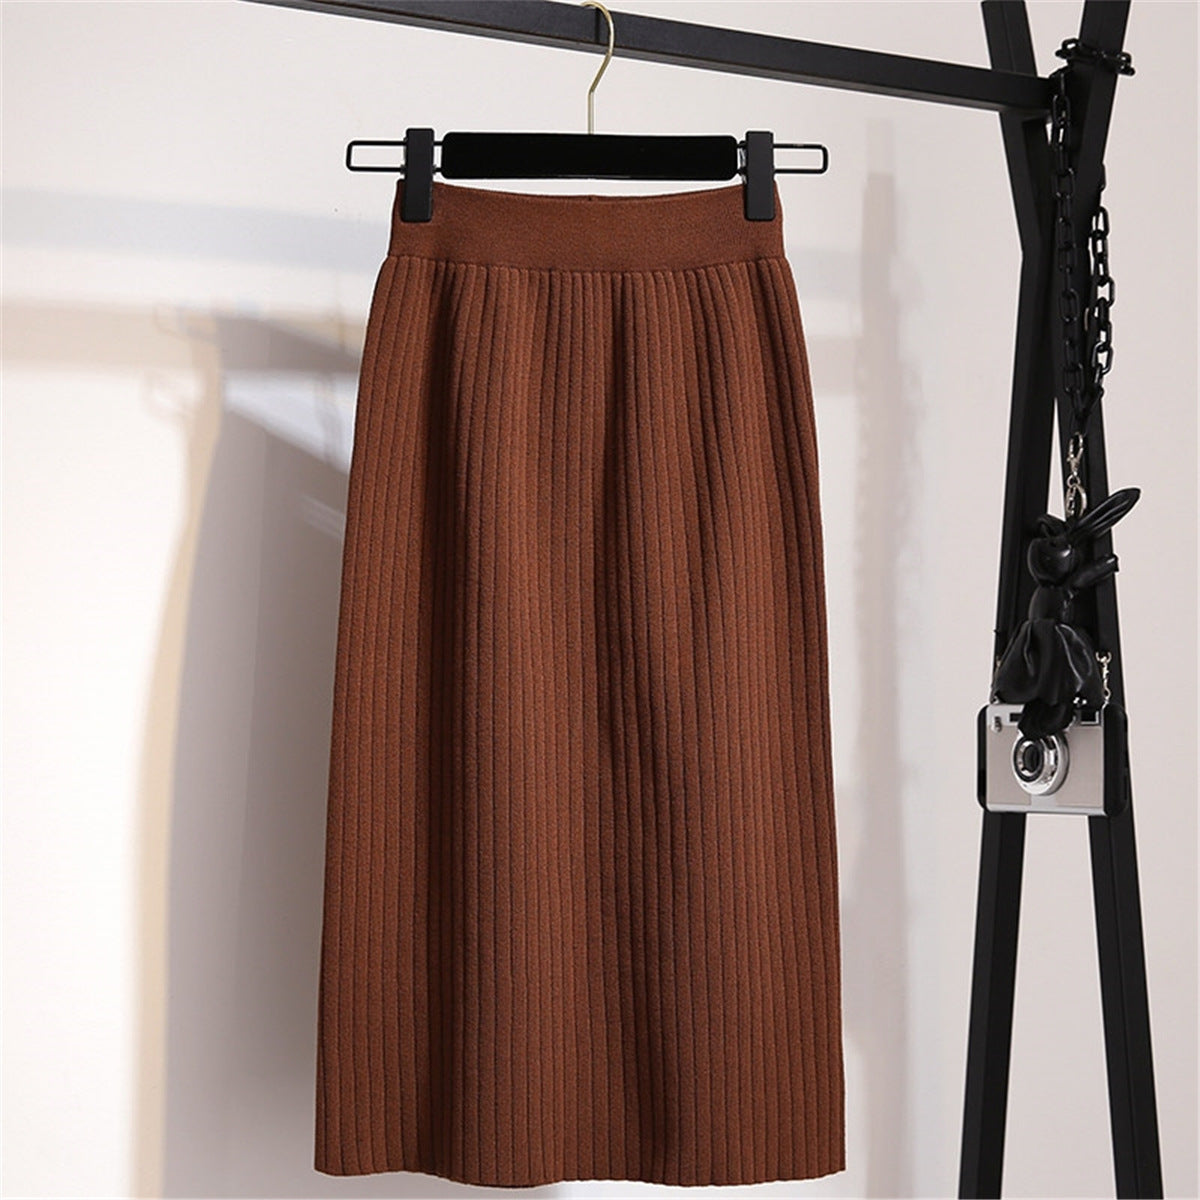 Autumn and winter skirt female long section 2021 new high backpa hip skirt boating first step Korean version of the pure color